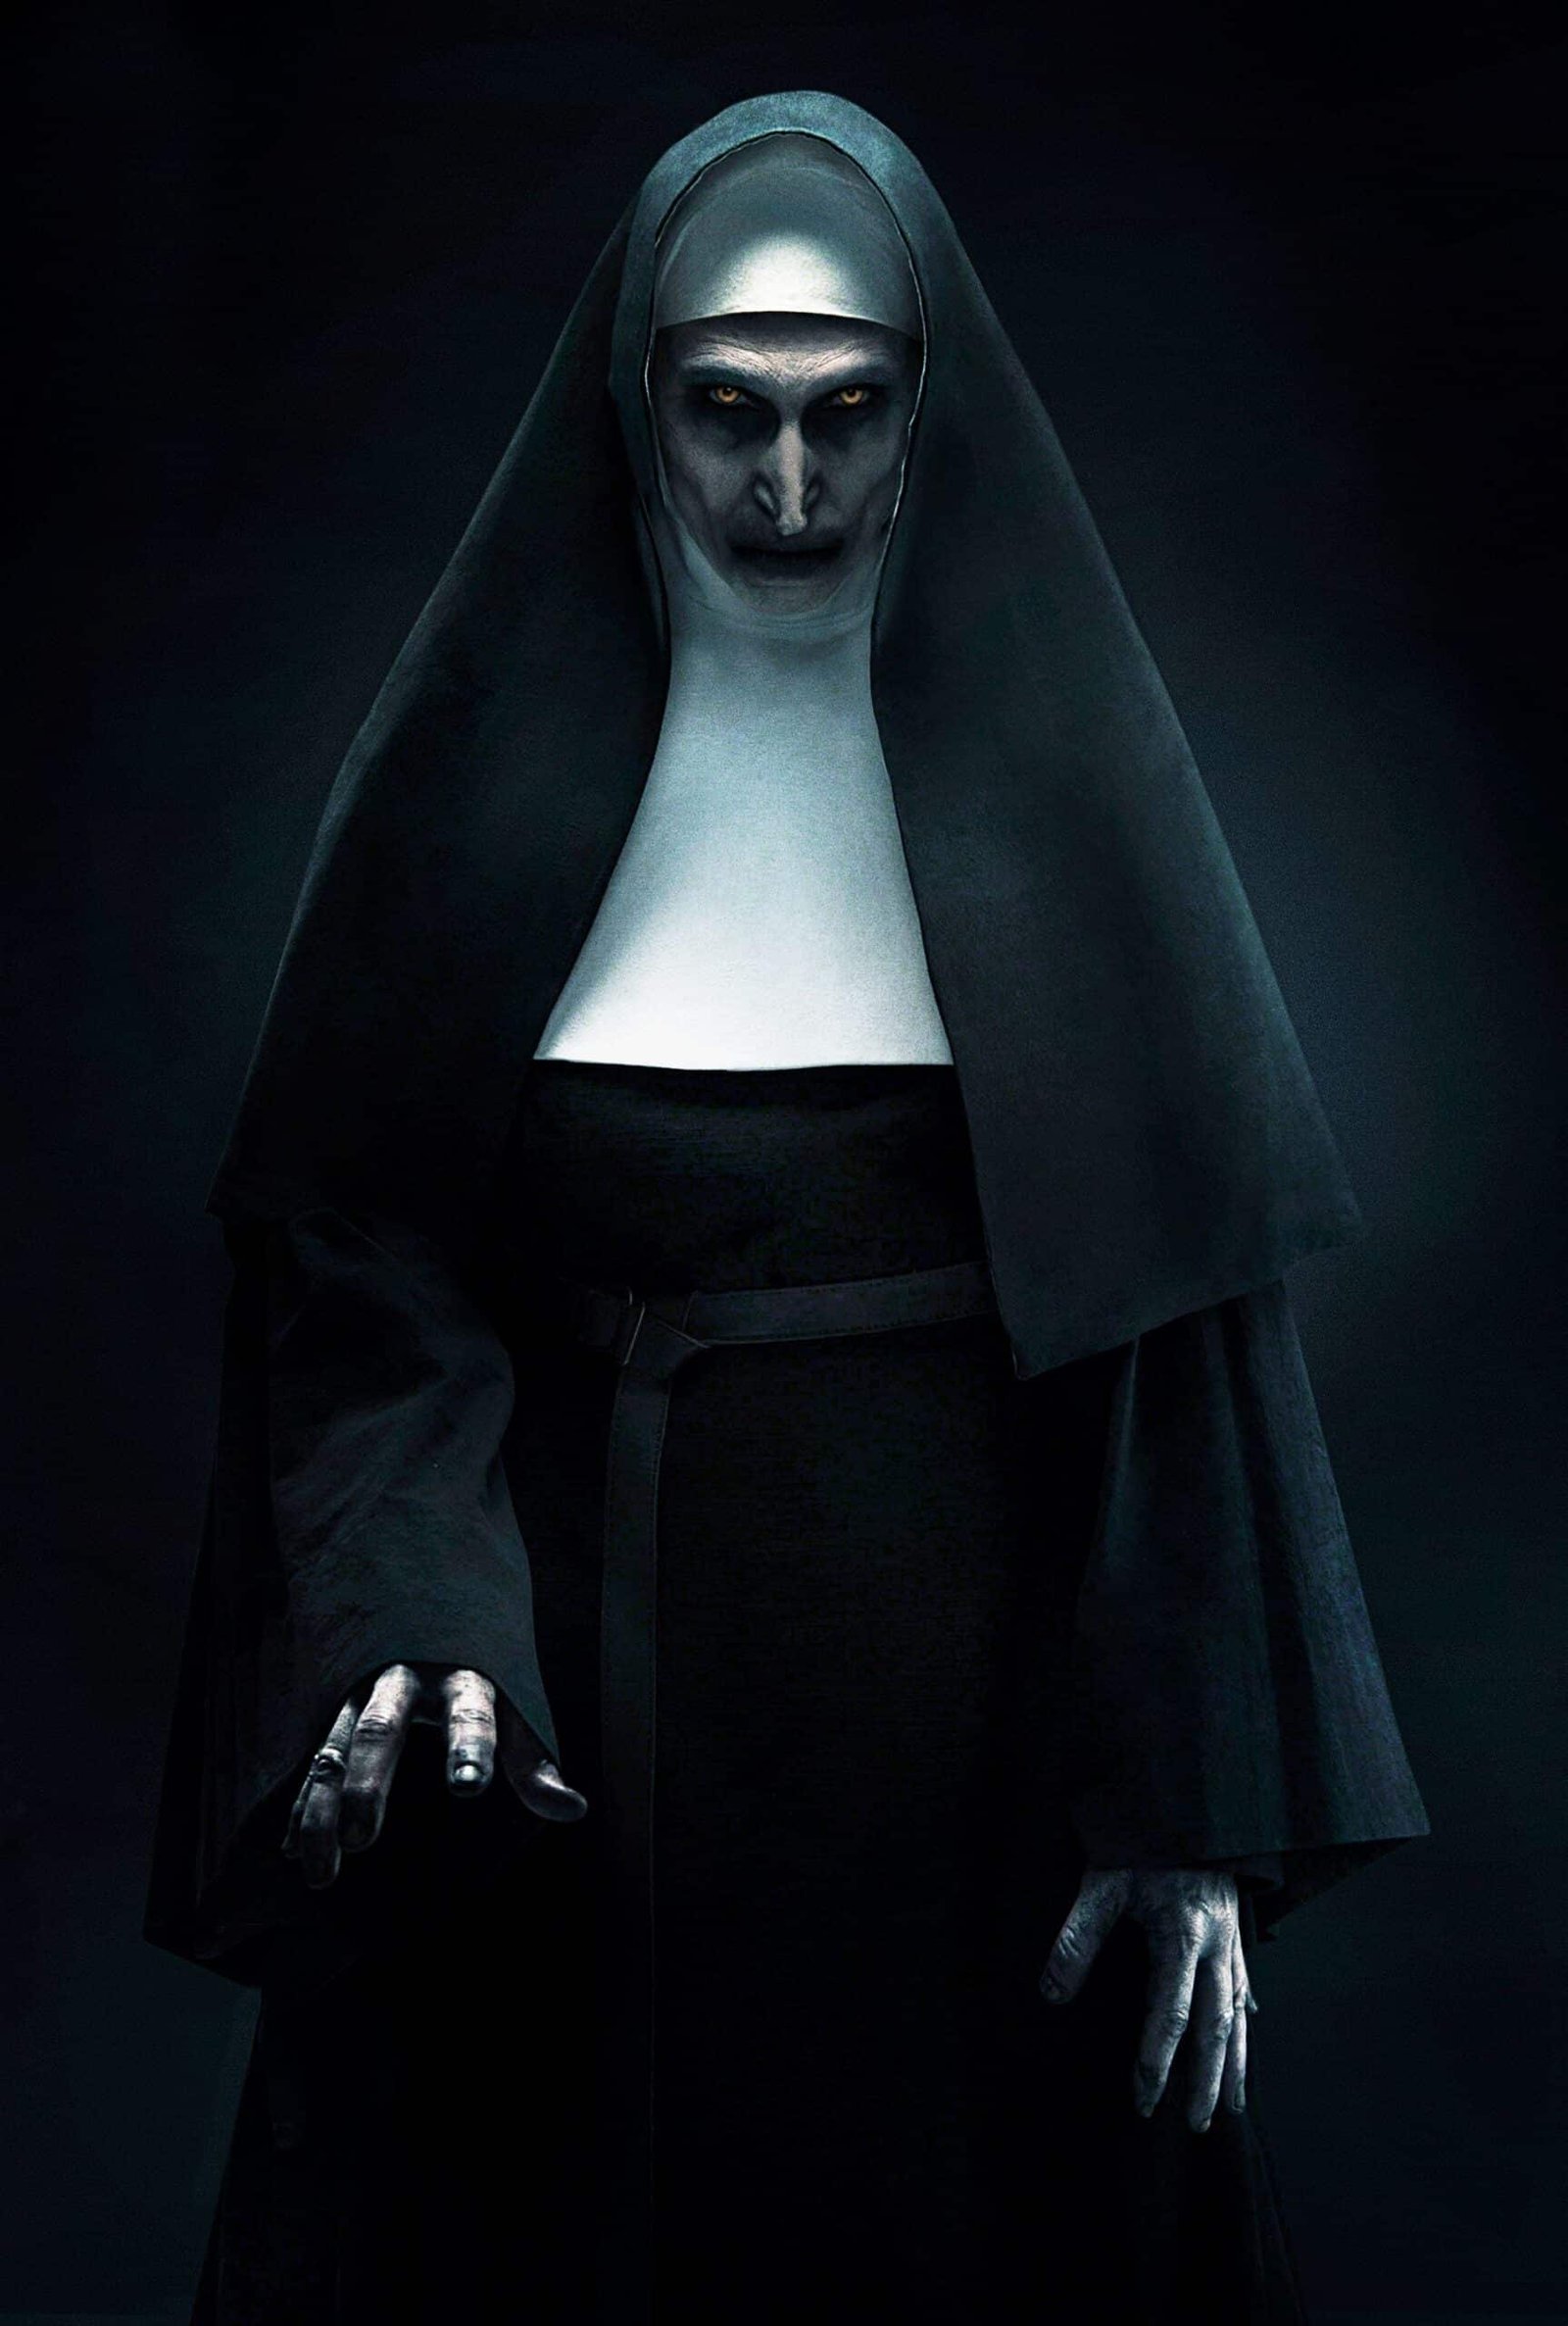 Is The Nun based on a true story?